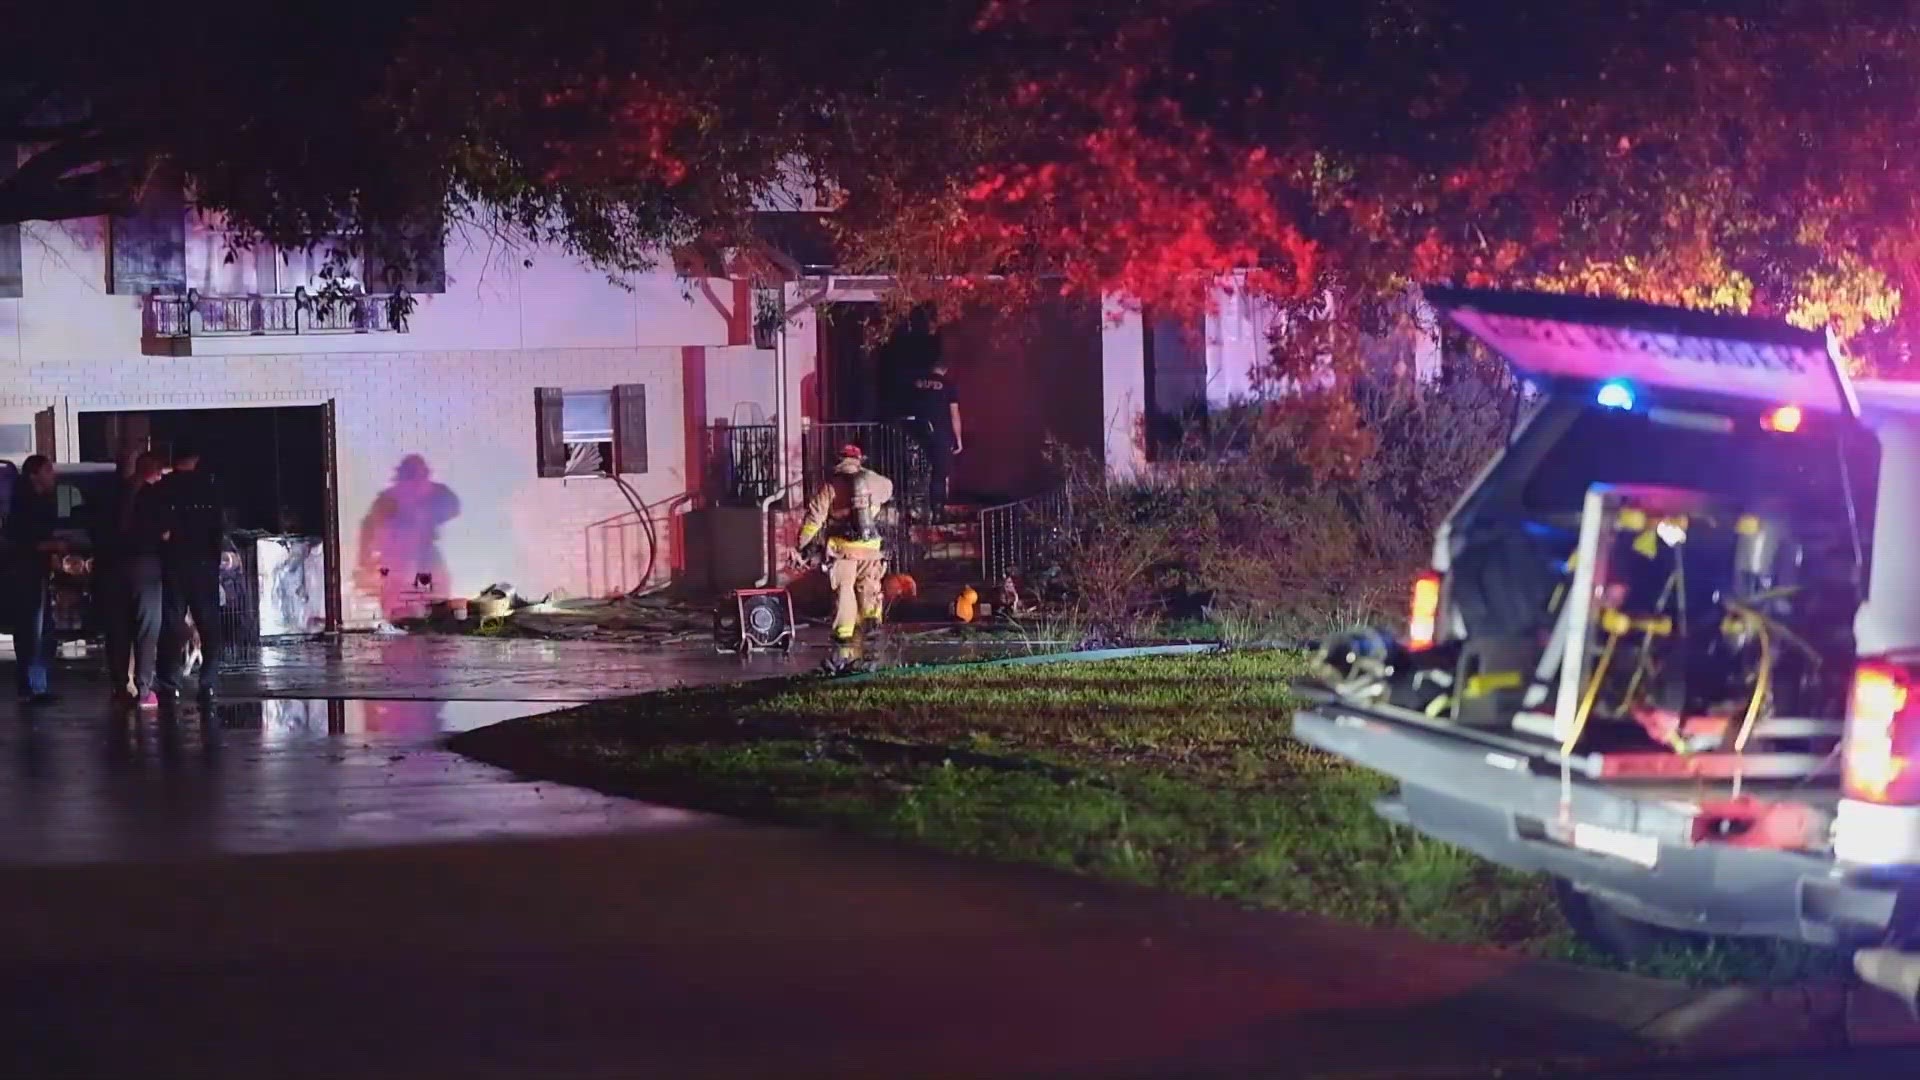 Investigators believe the fire started in a washing machine located in the home's garage.